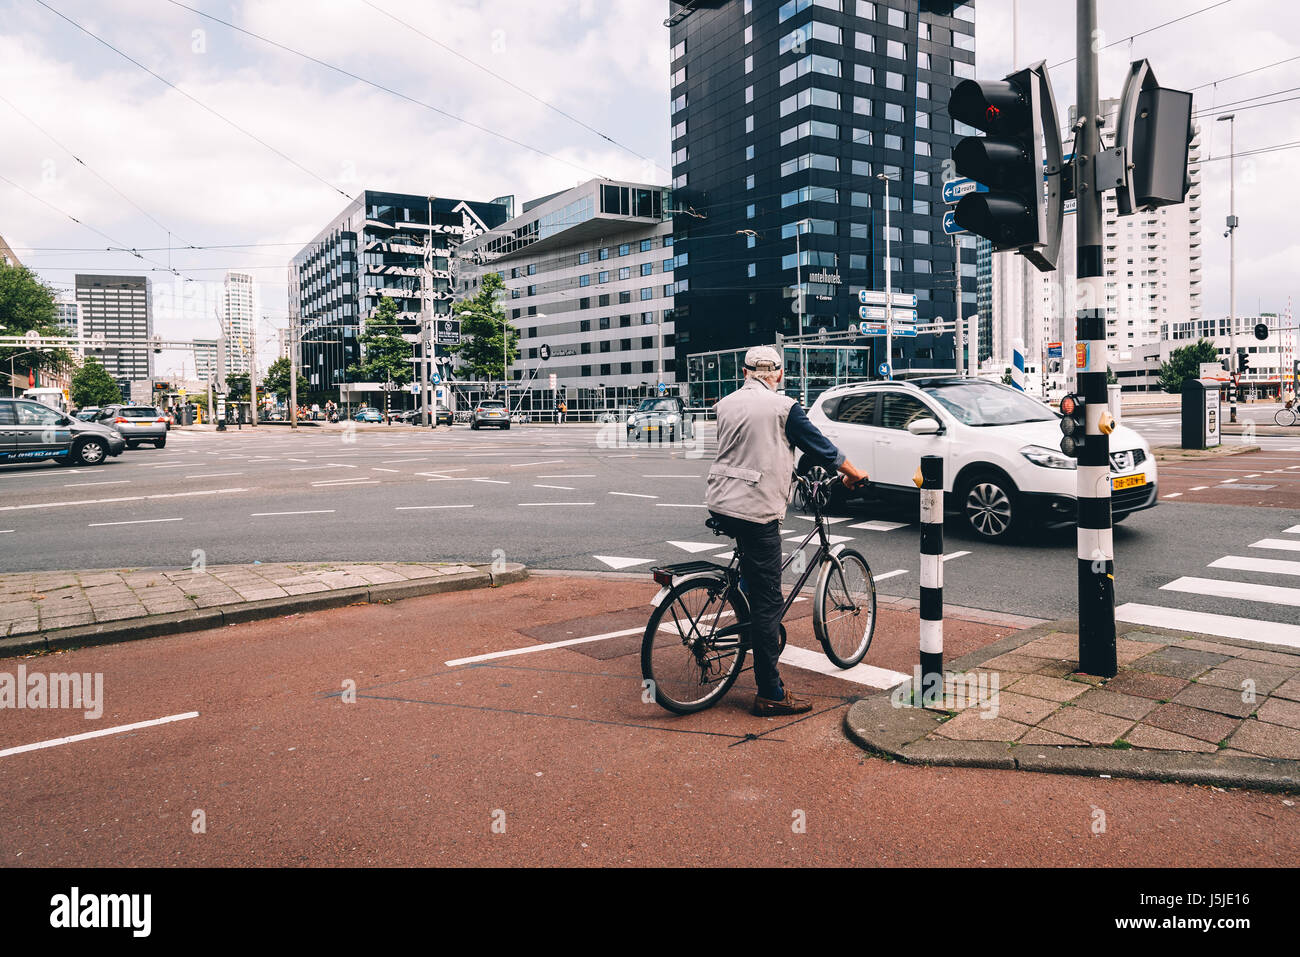 Rottedam, The Netherlands - August 6, 2016: Rotterdam cityscape and car traffic in a crossroads. Rotterdam is home to some world famous architecture f Stock Photo